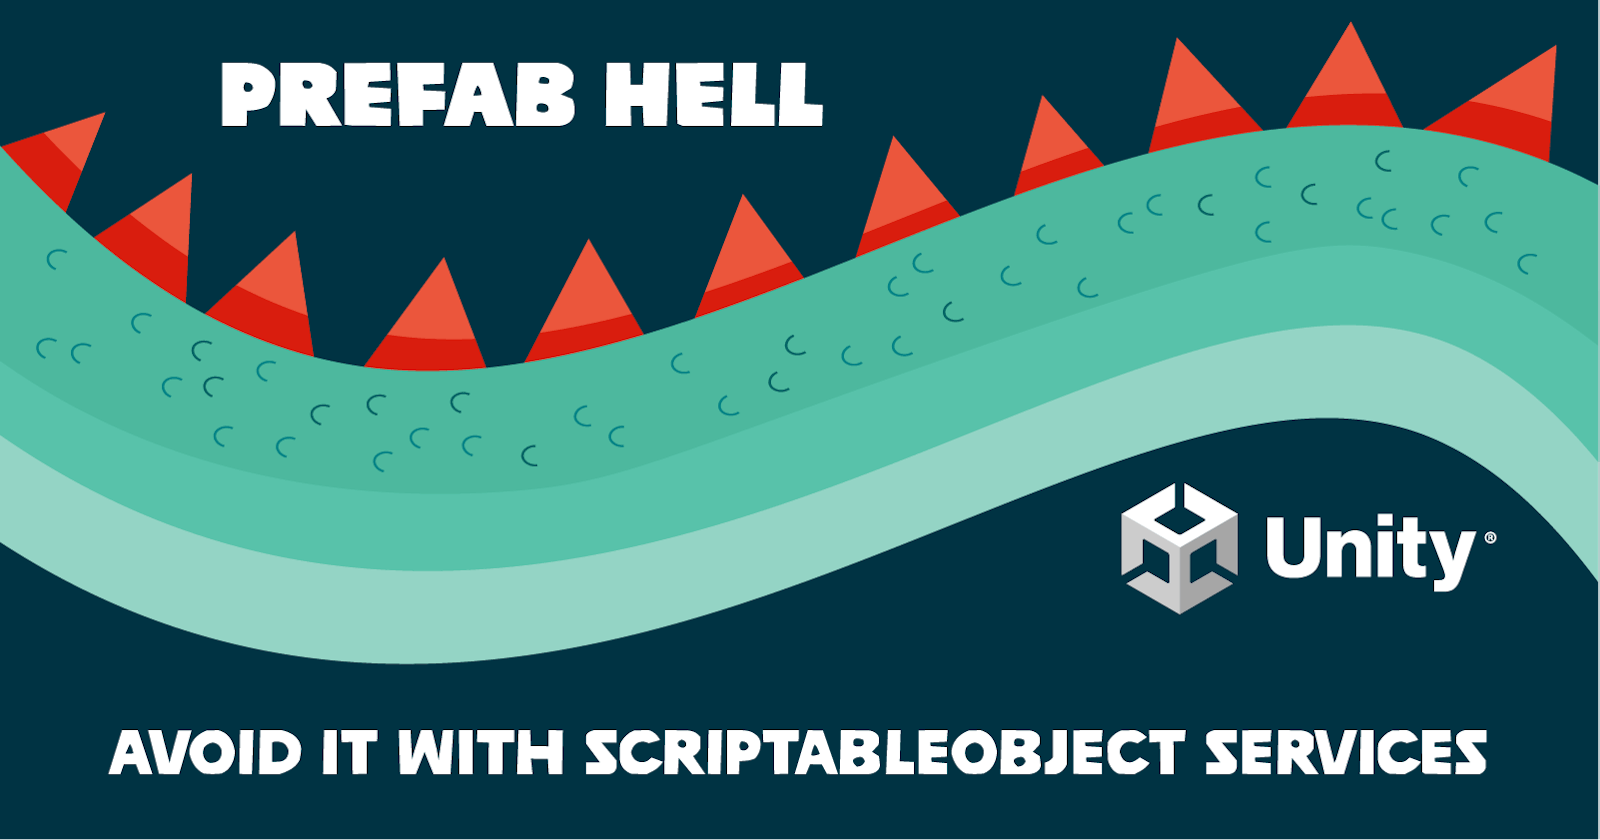 Avoid Prefab Hell with ScriptableObject Services in Unity